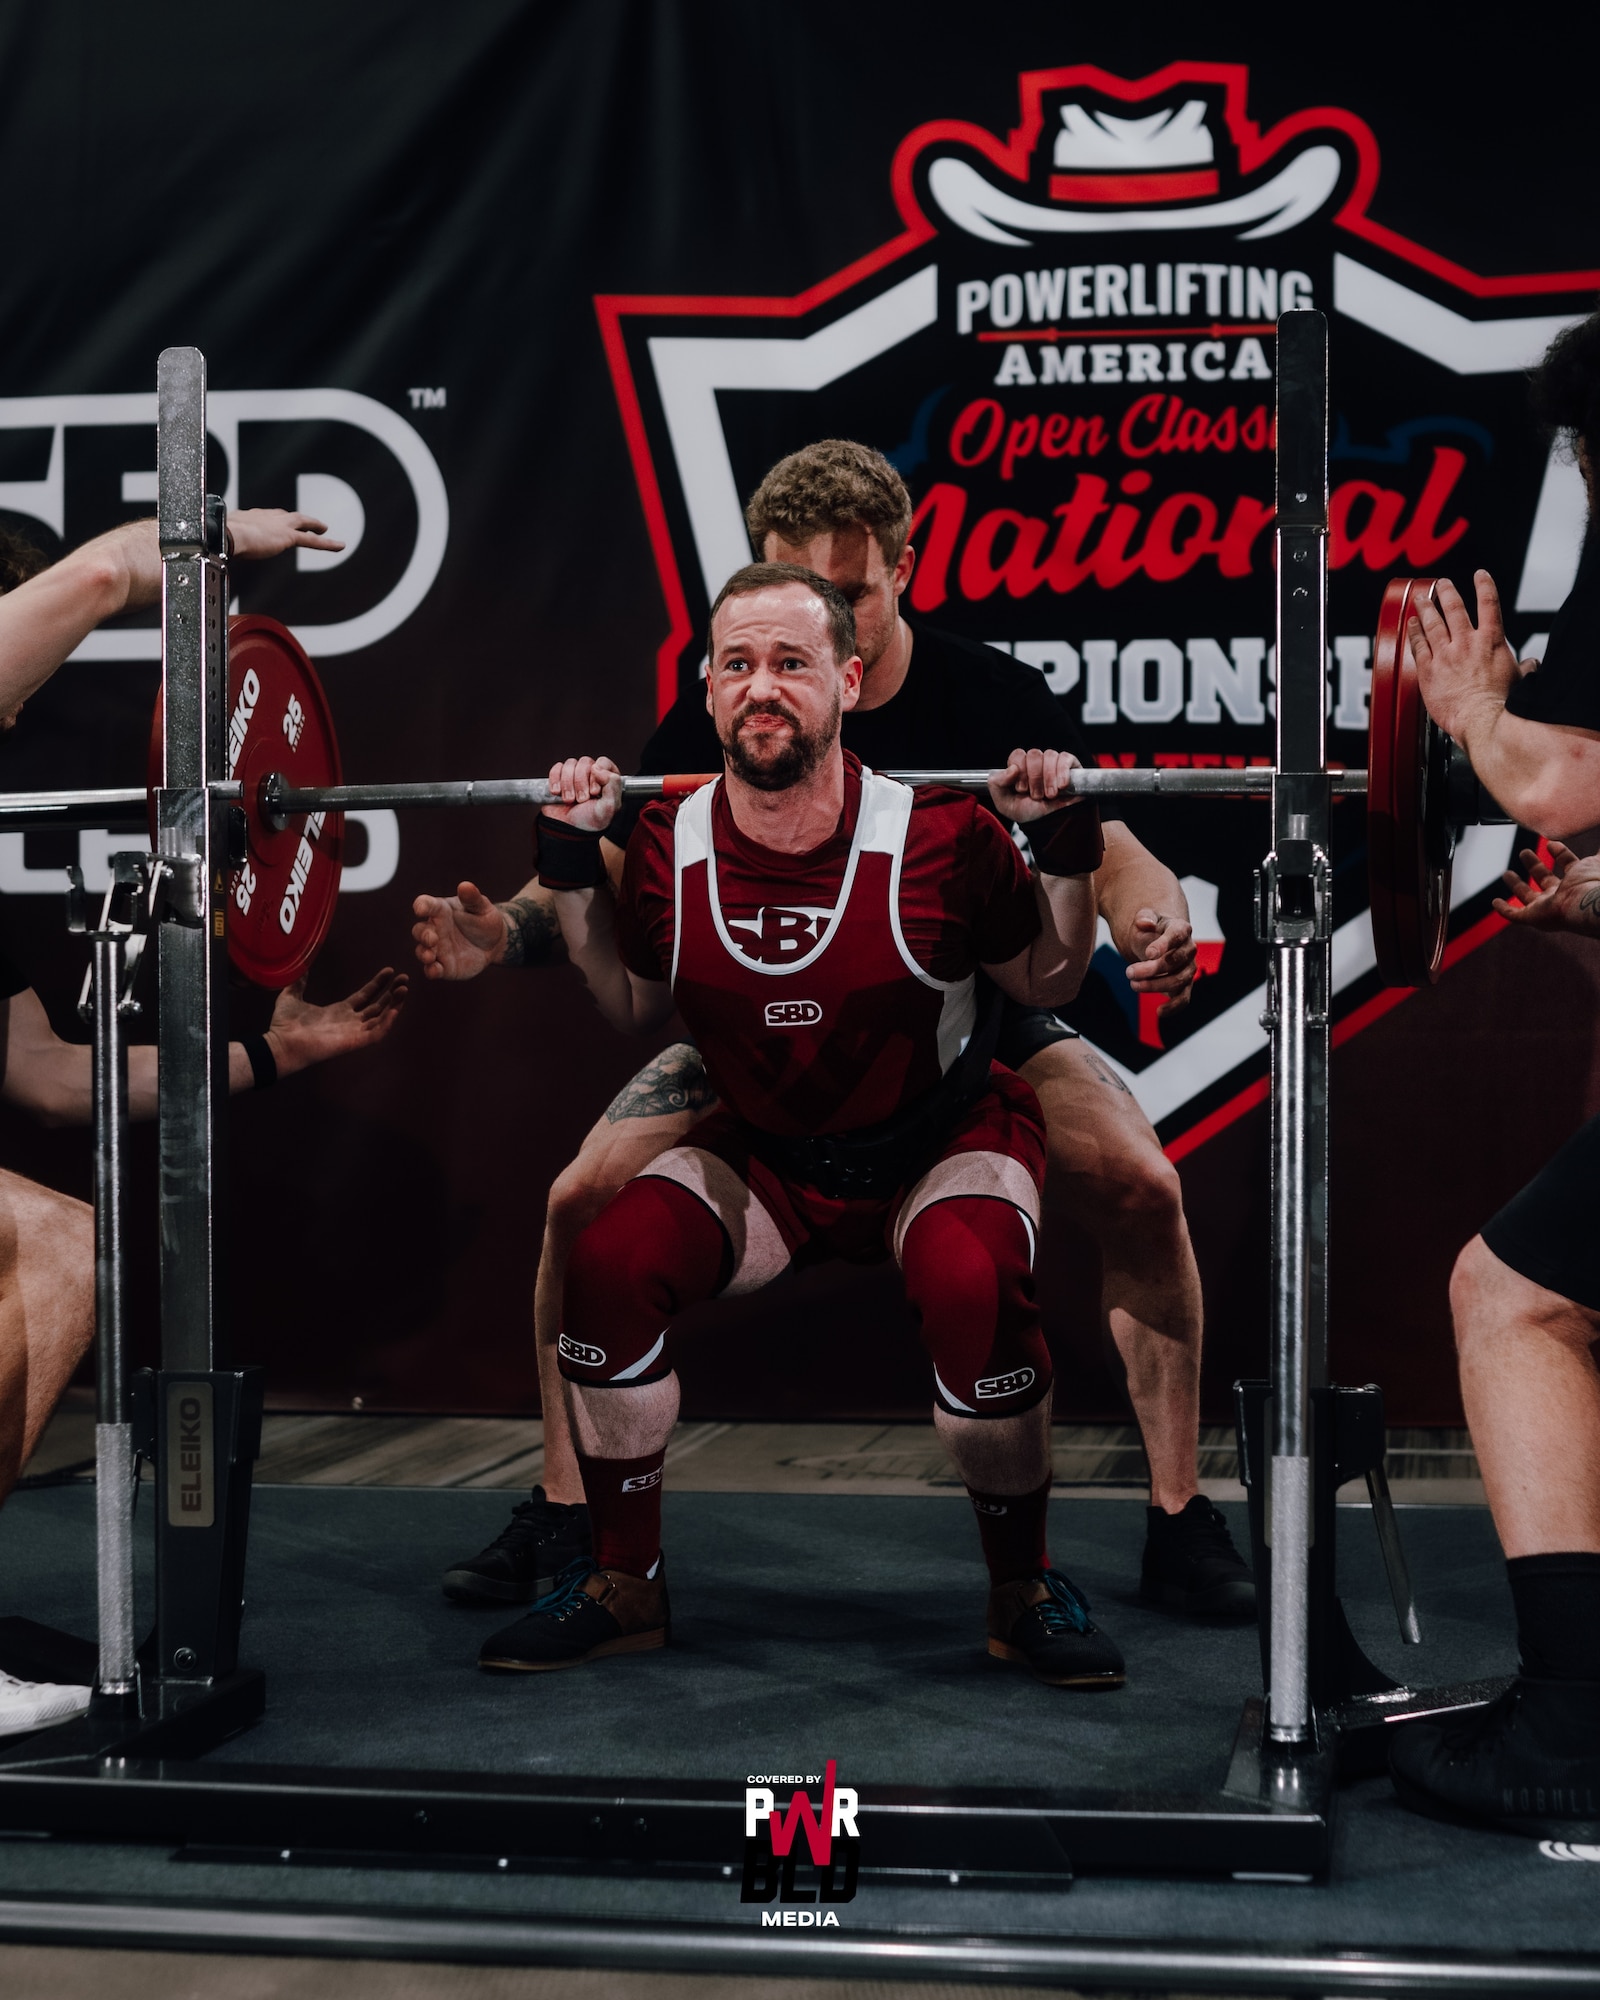 Local powerlifter with elite resume gearing up for more in August